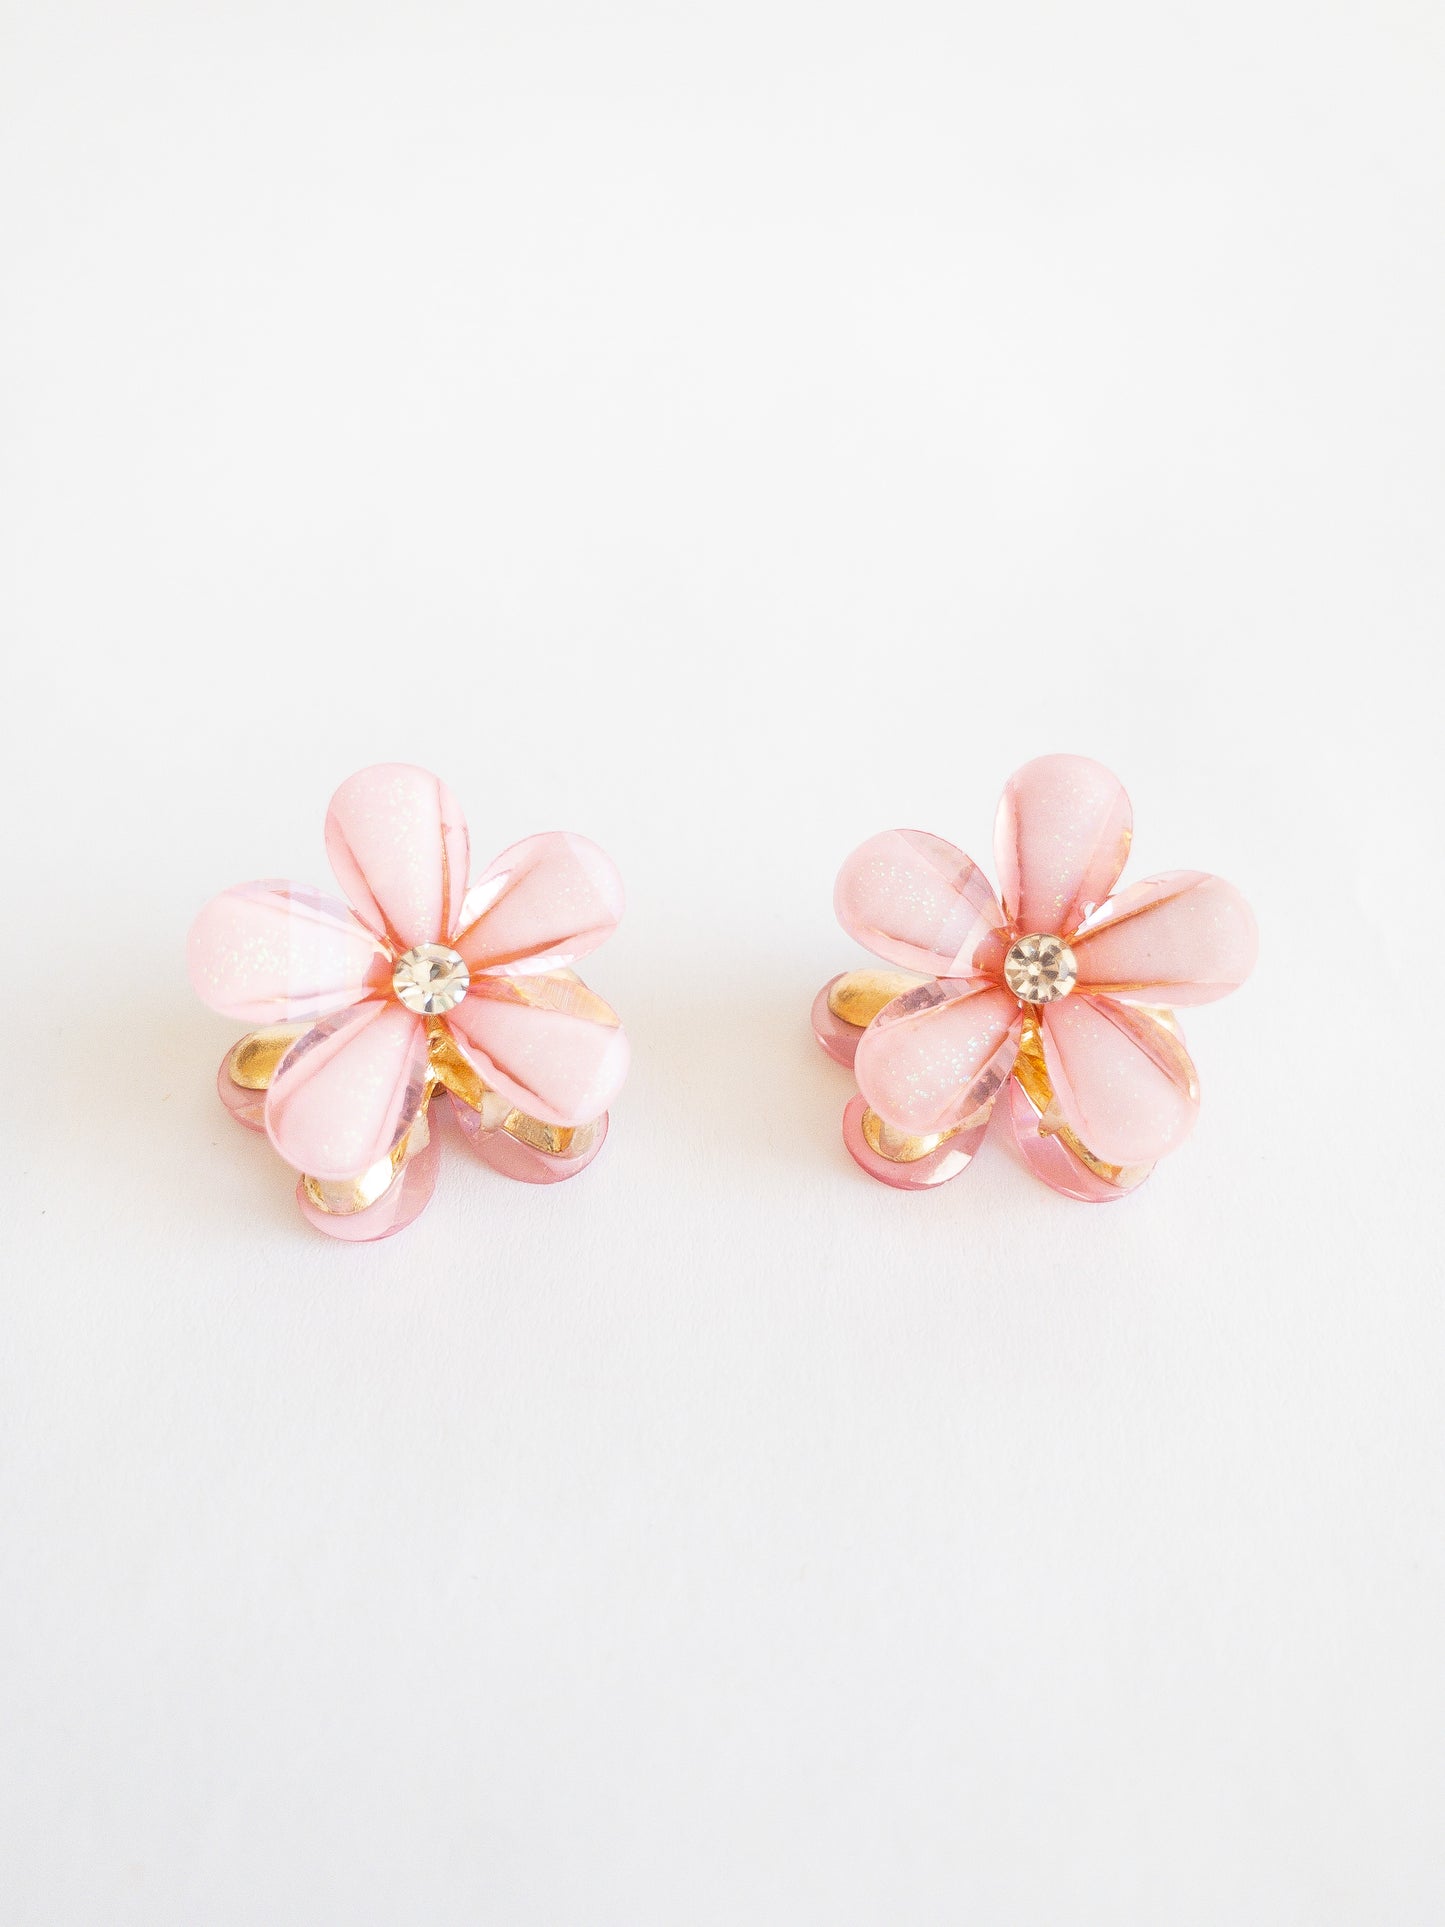 Dazzling small flower hair claws with a subtle glittery shimmer and a pretty white gemstone in the center. Each set has two flower claws to pair up in your favorite styles.